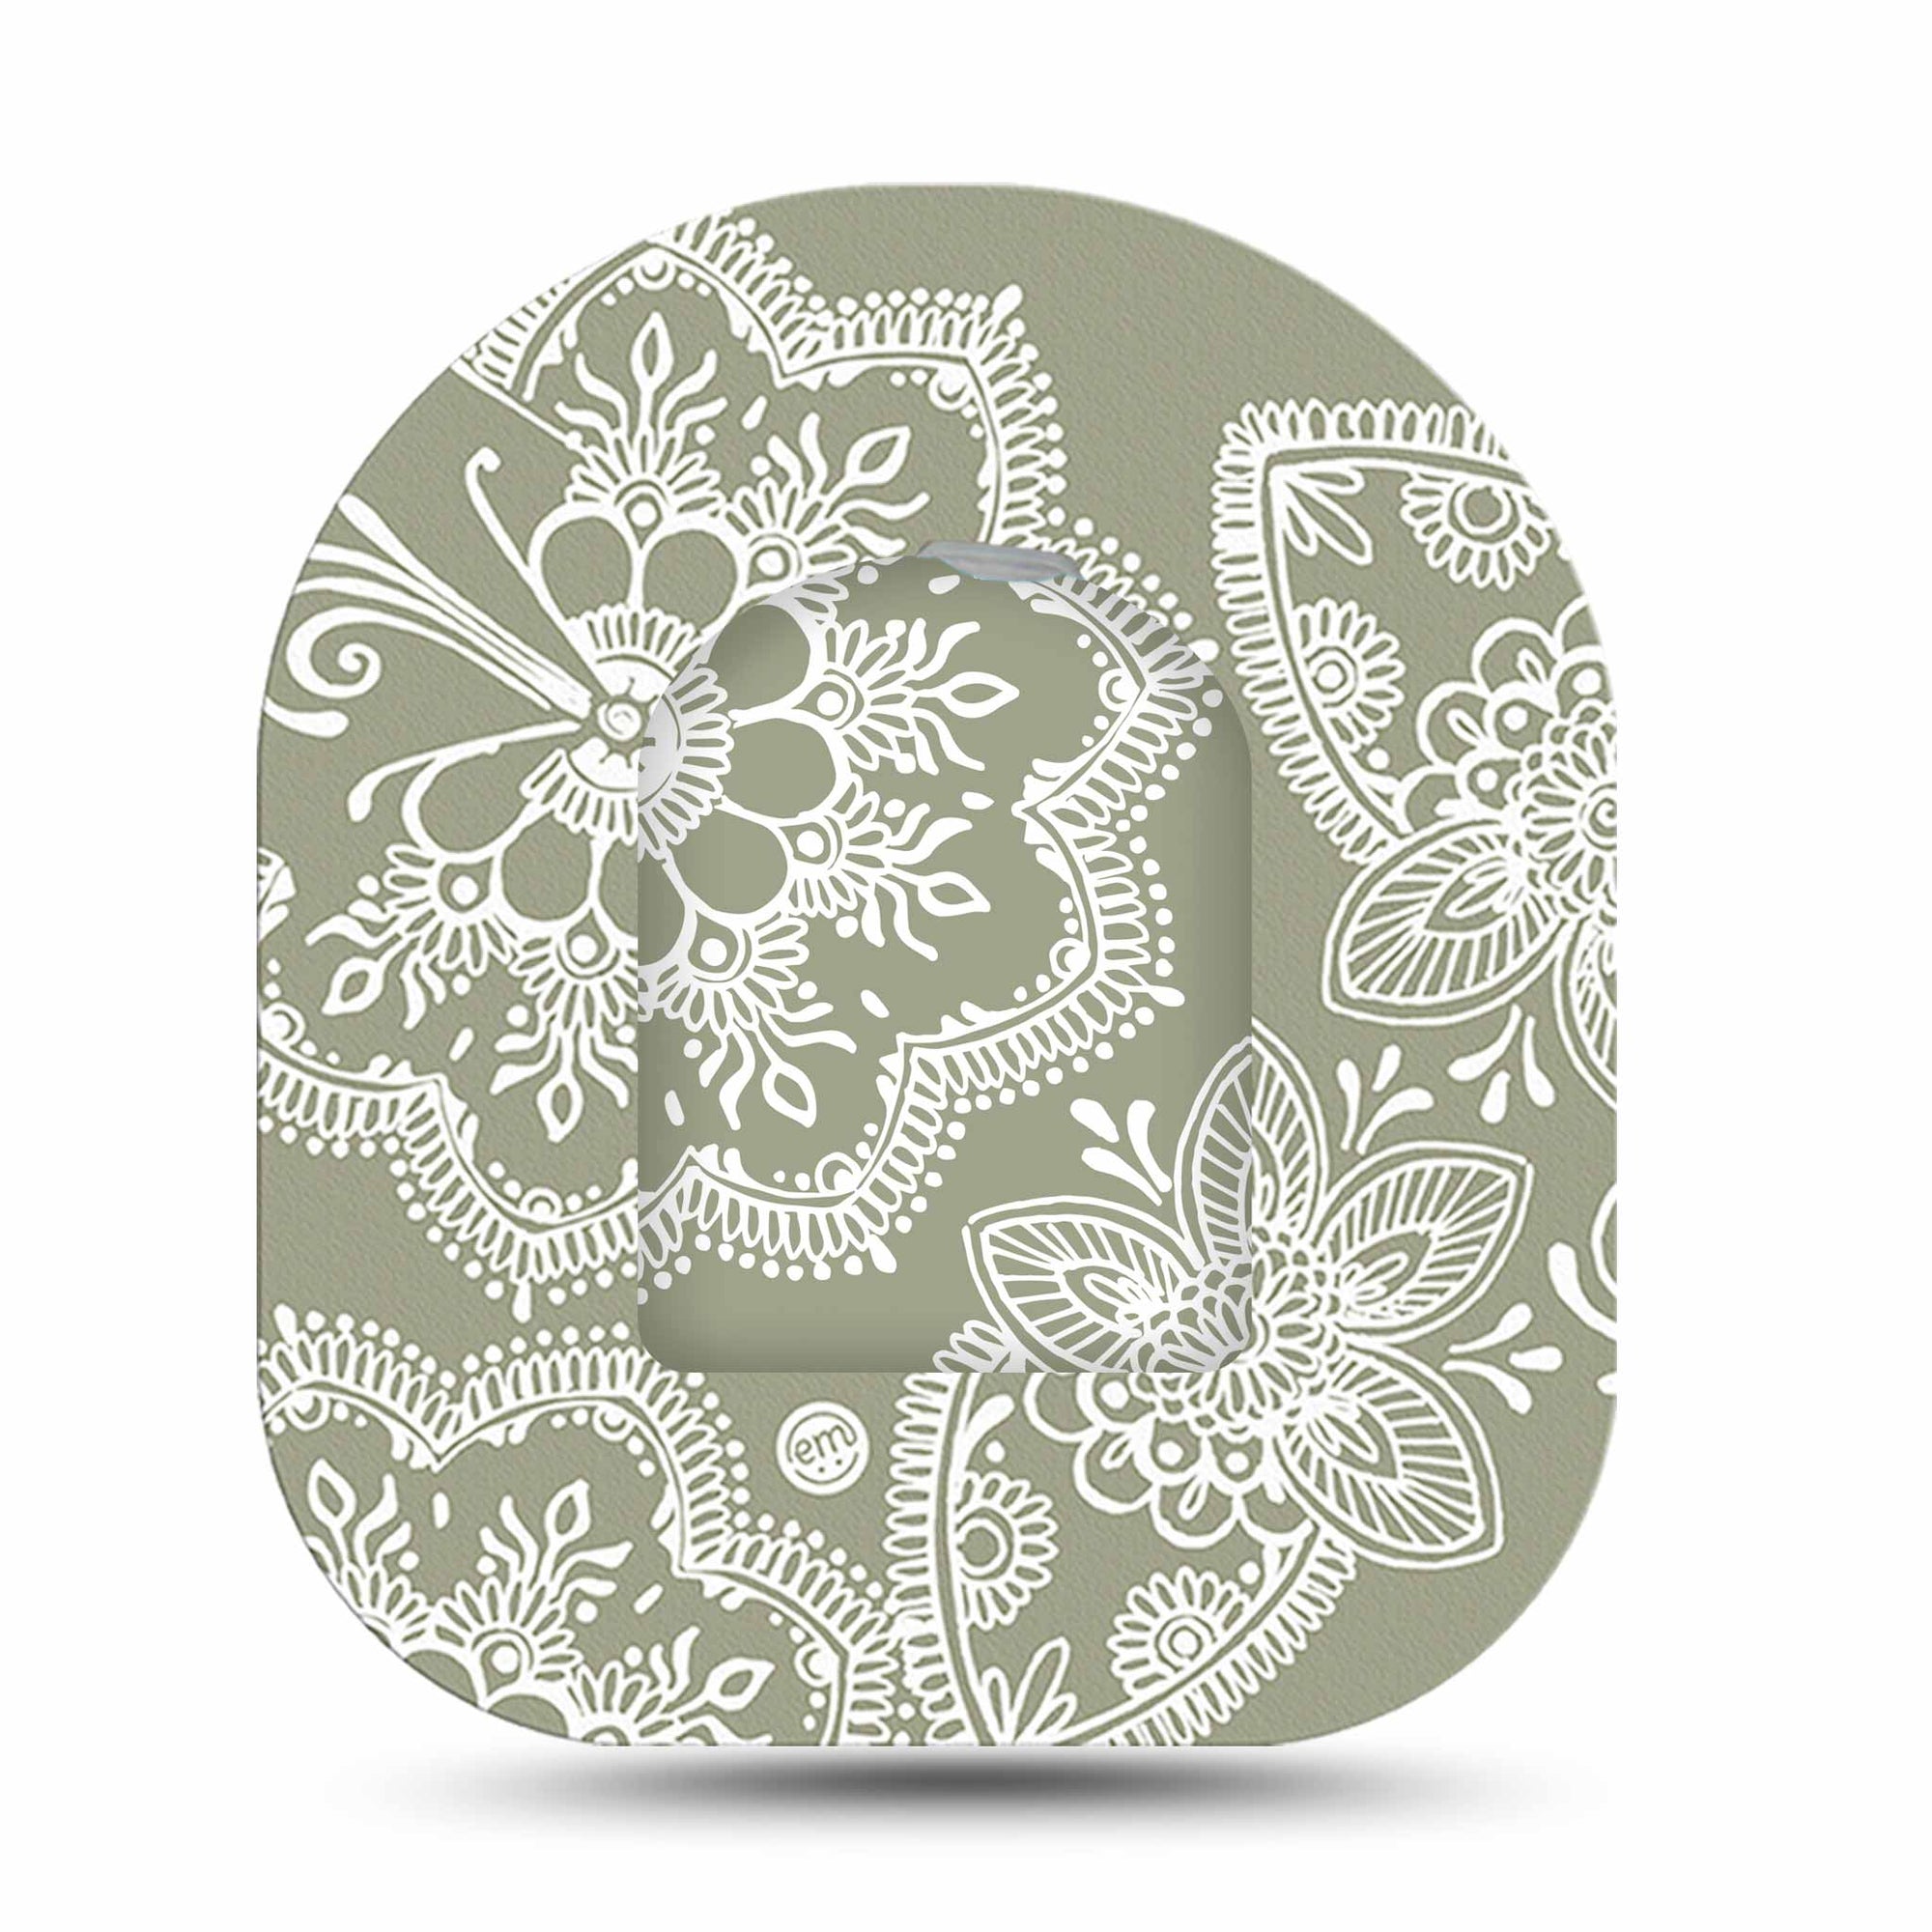 ExpressionMed Olive Henna Omnipod Sticker and Matching Adhesive Cover